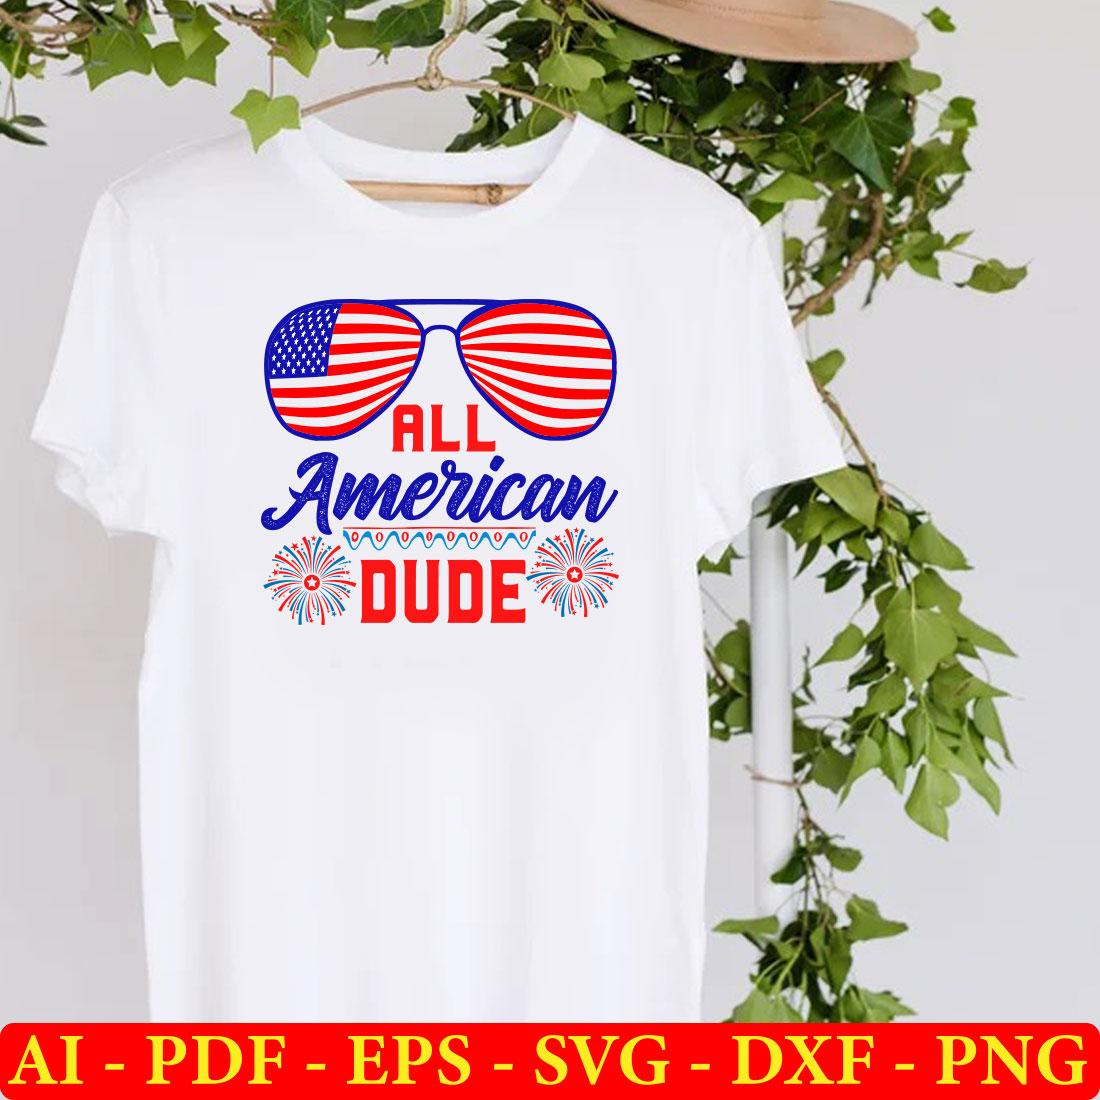 T - shirt that says all american dude with sunglasses on it.